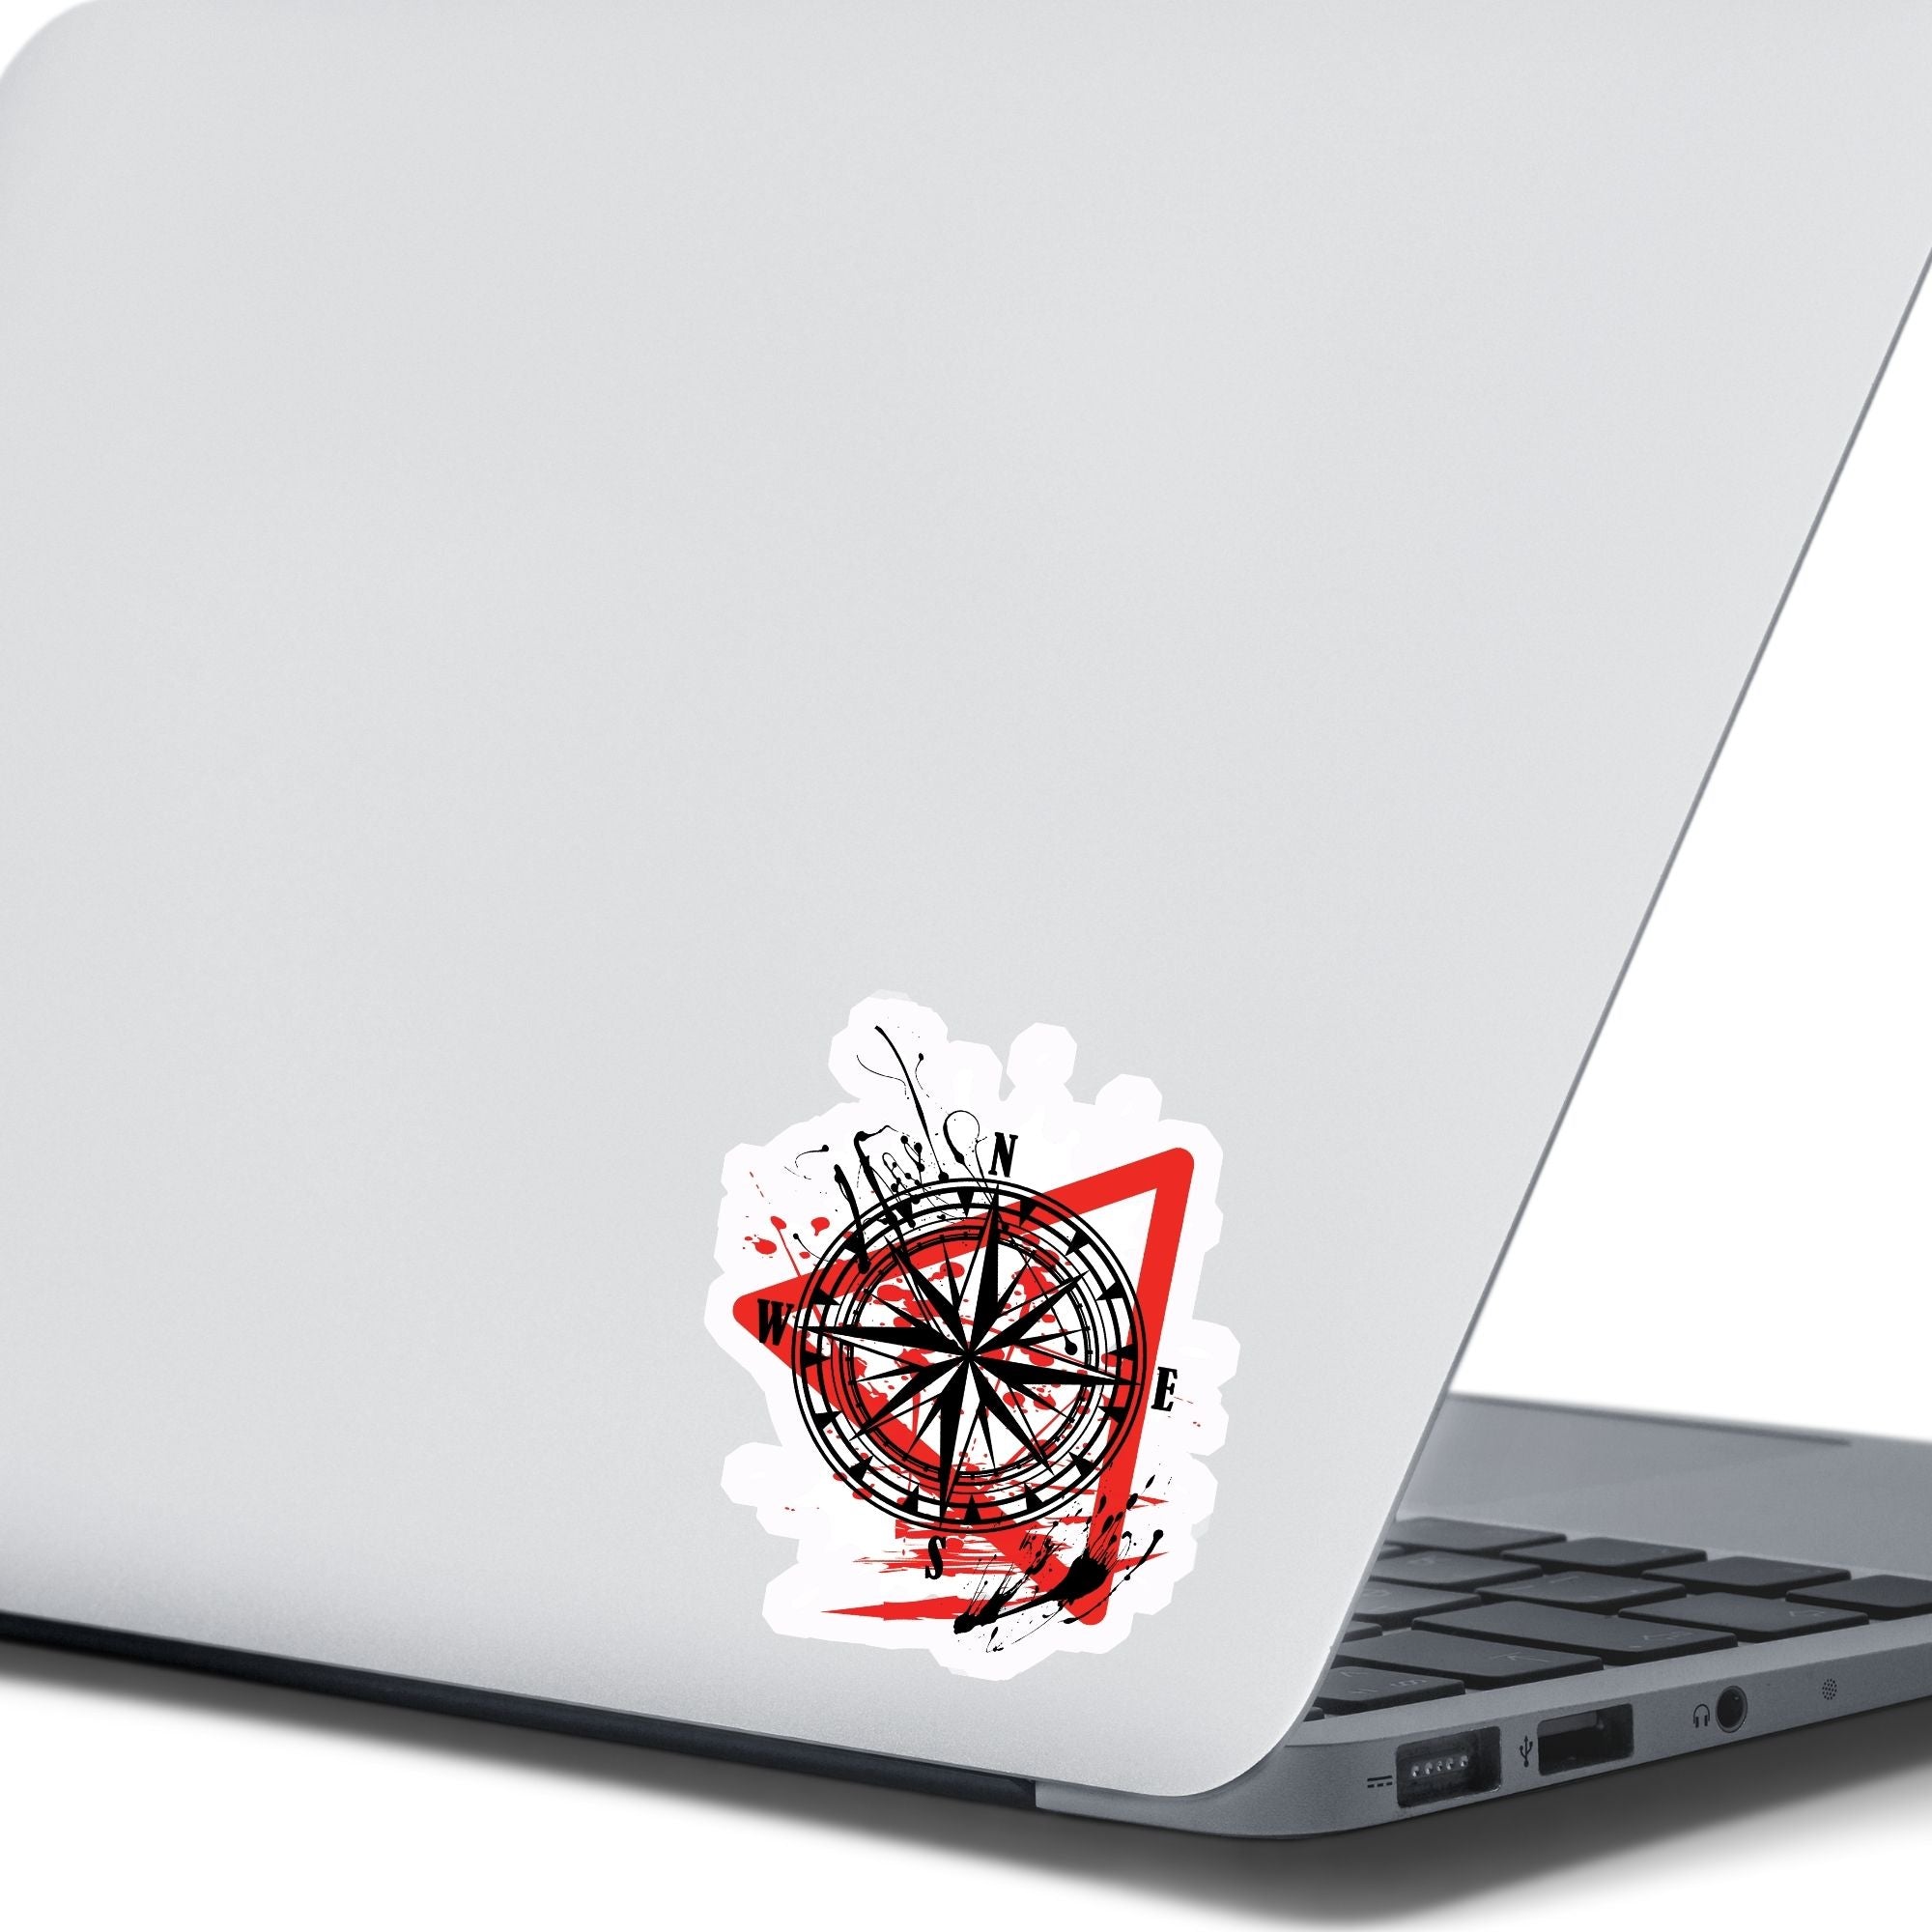 Trash Polka uses red, black, and white with a combination of abstract, surrealistic, and realistic images, and this individual die-cut sticker features a compass inside a red triangle outline on a white background. This image shows the trash polka compass sticker on the back of an open laptop.